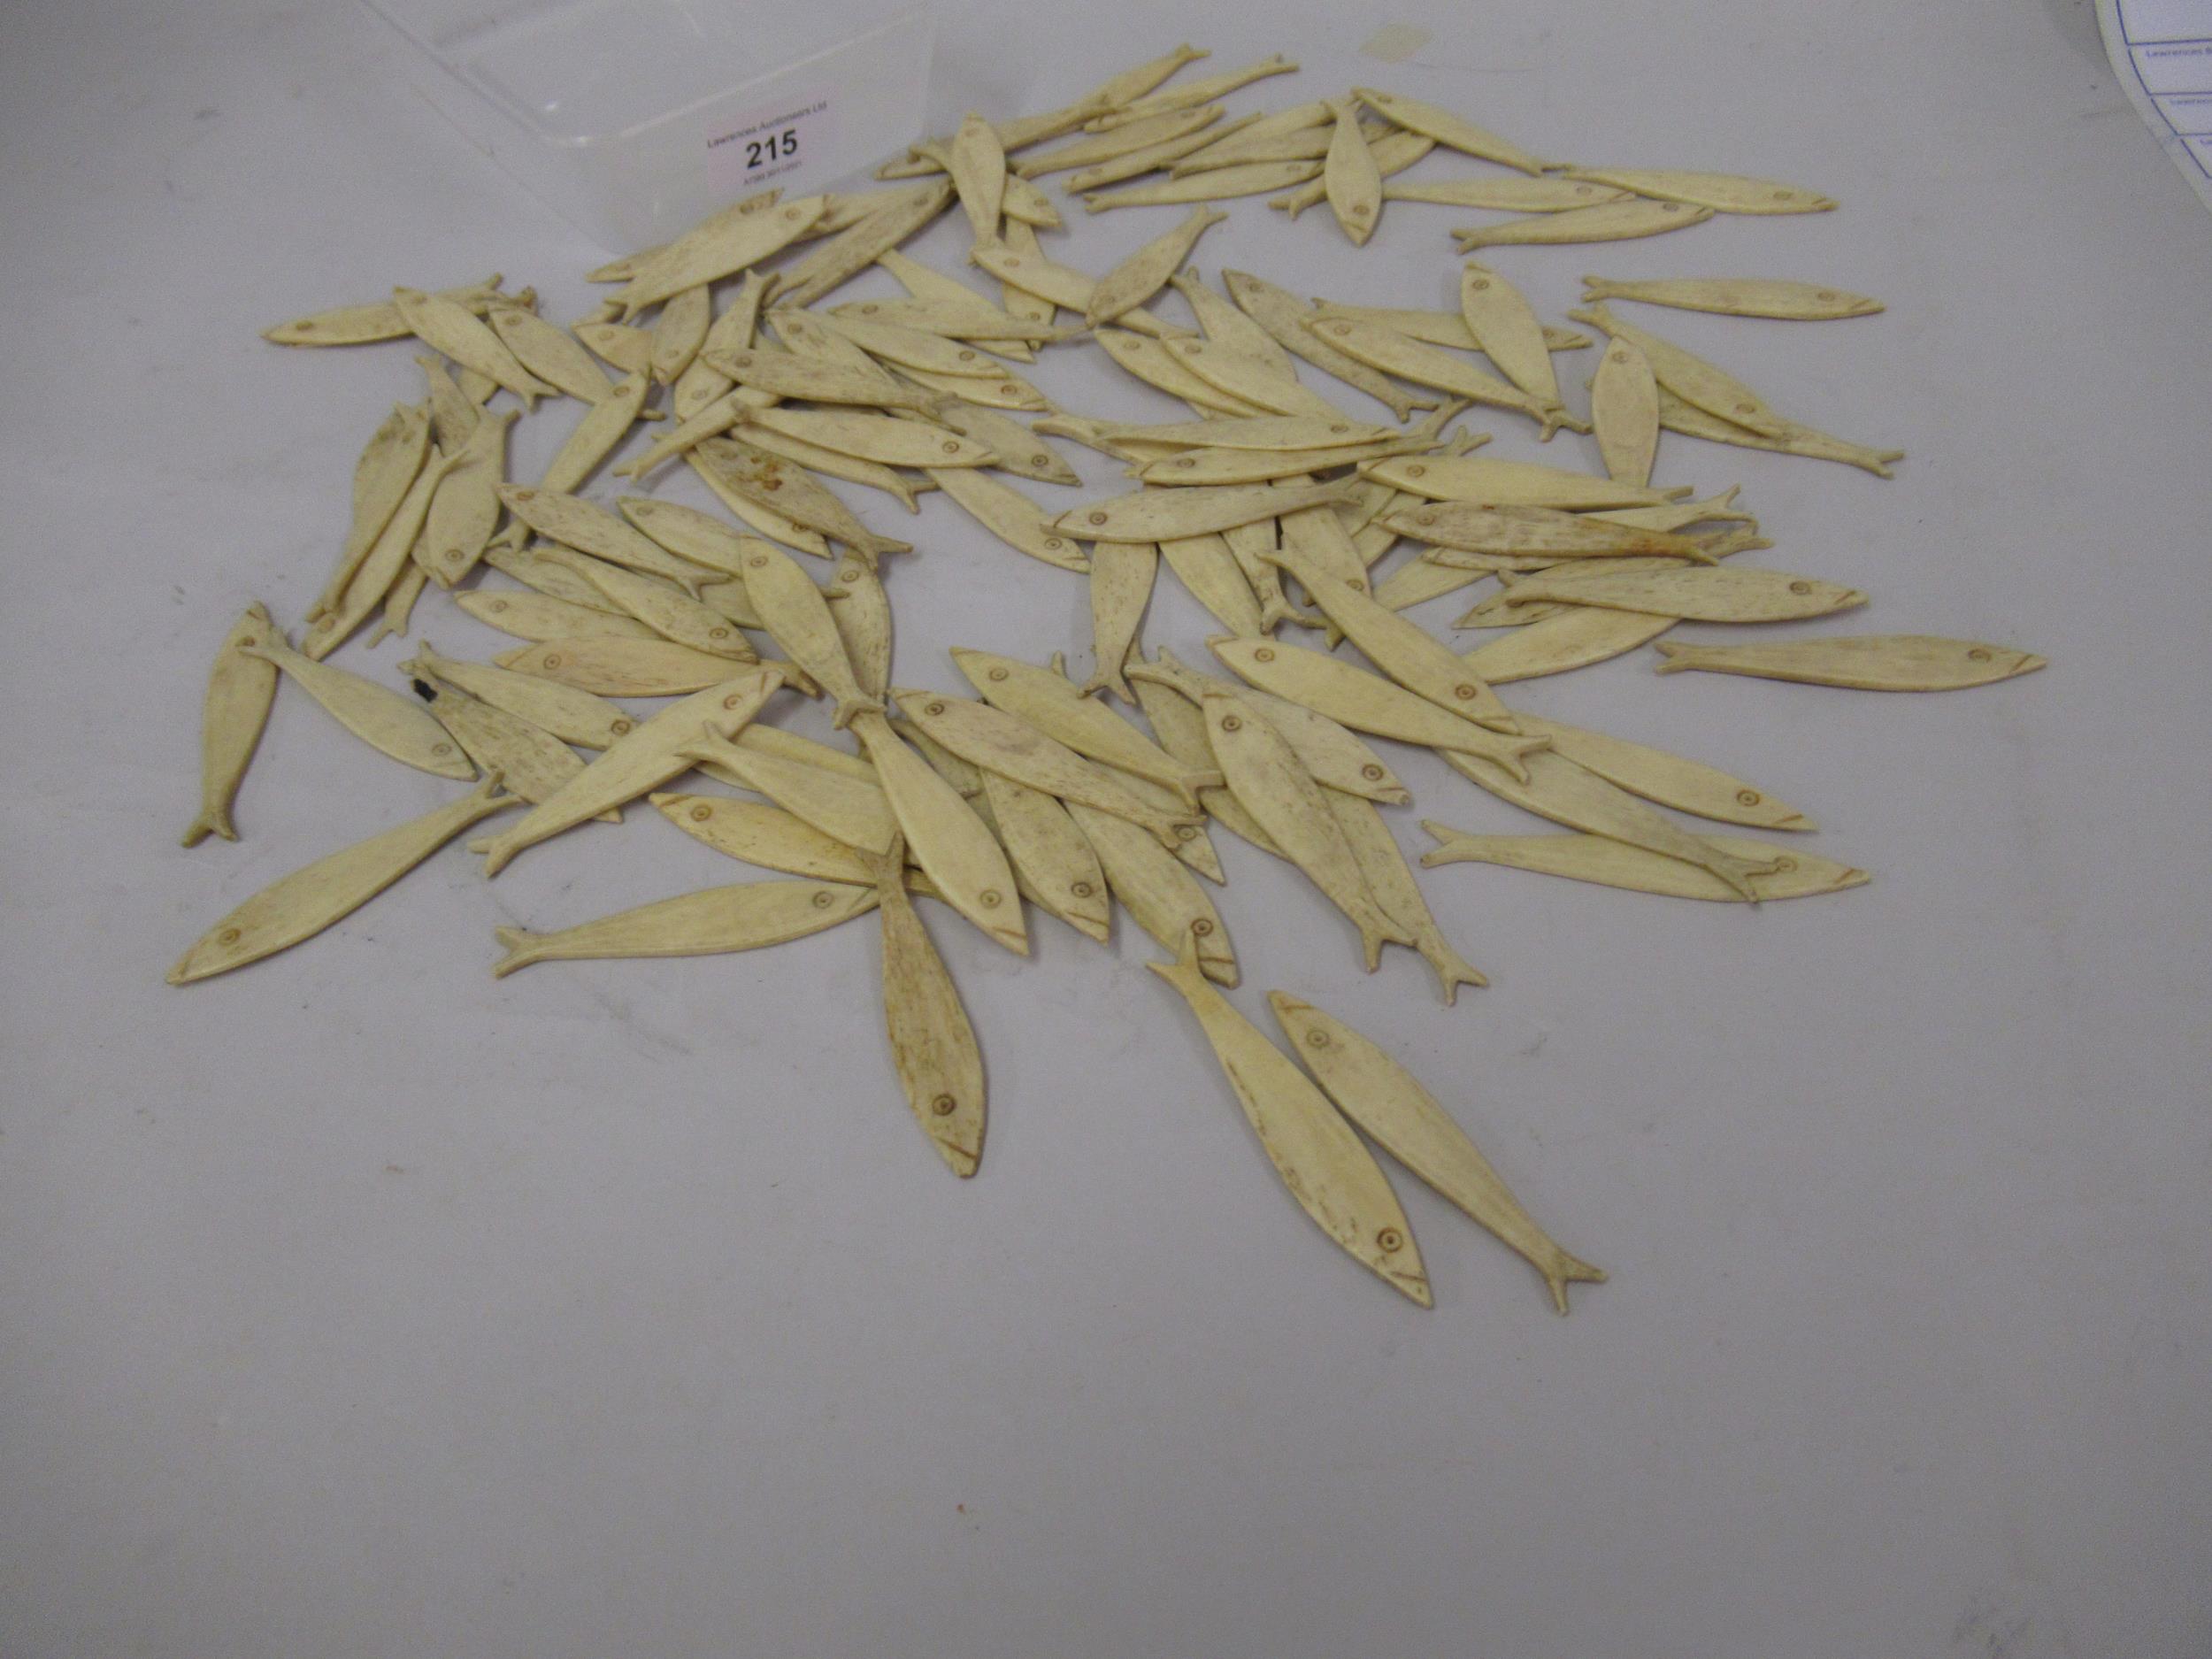 Quantity of 19th Century bone fish shaped gaming counters